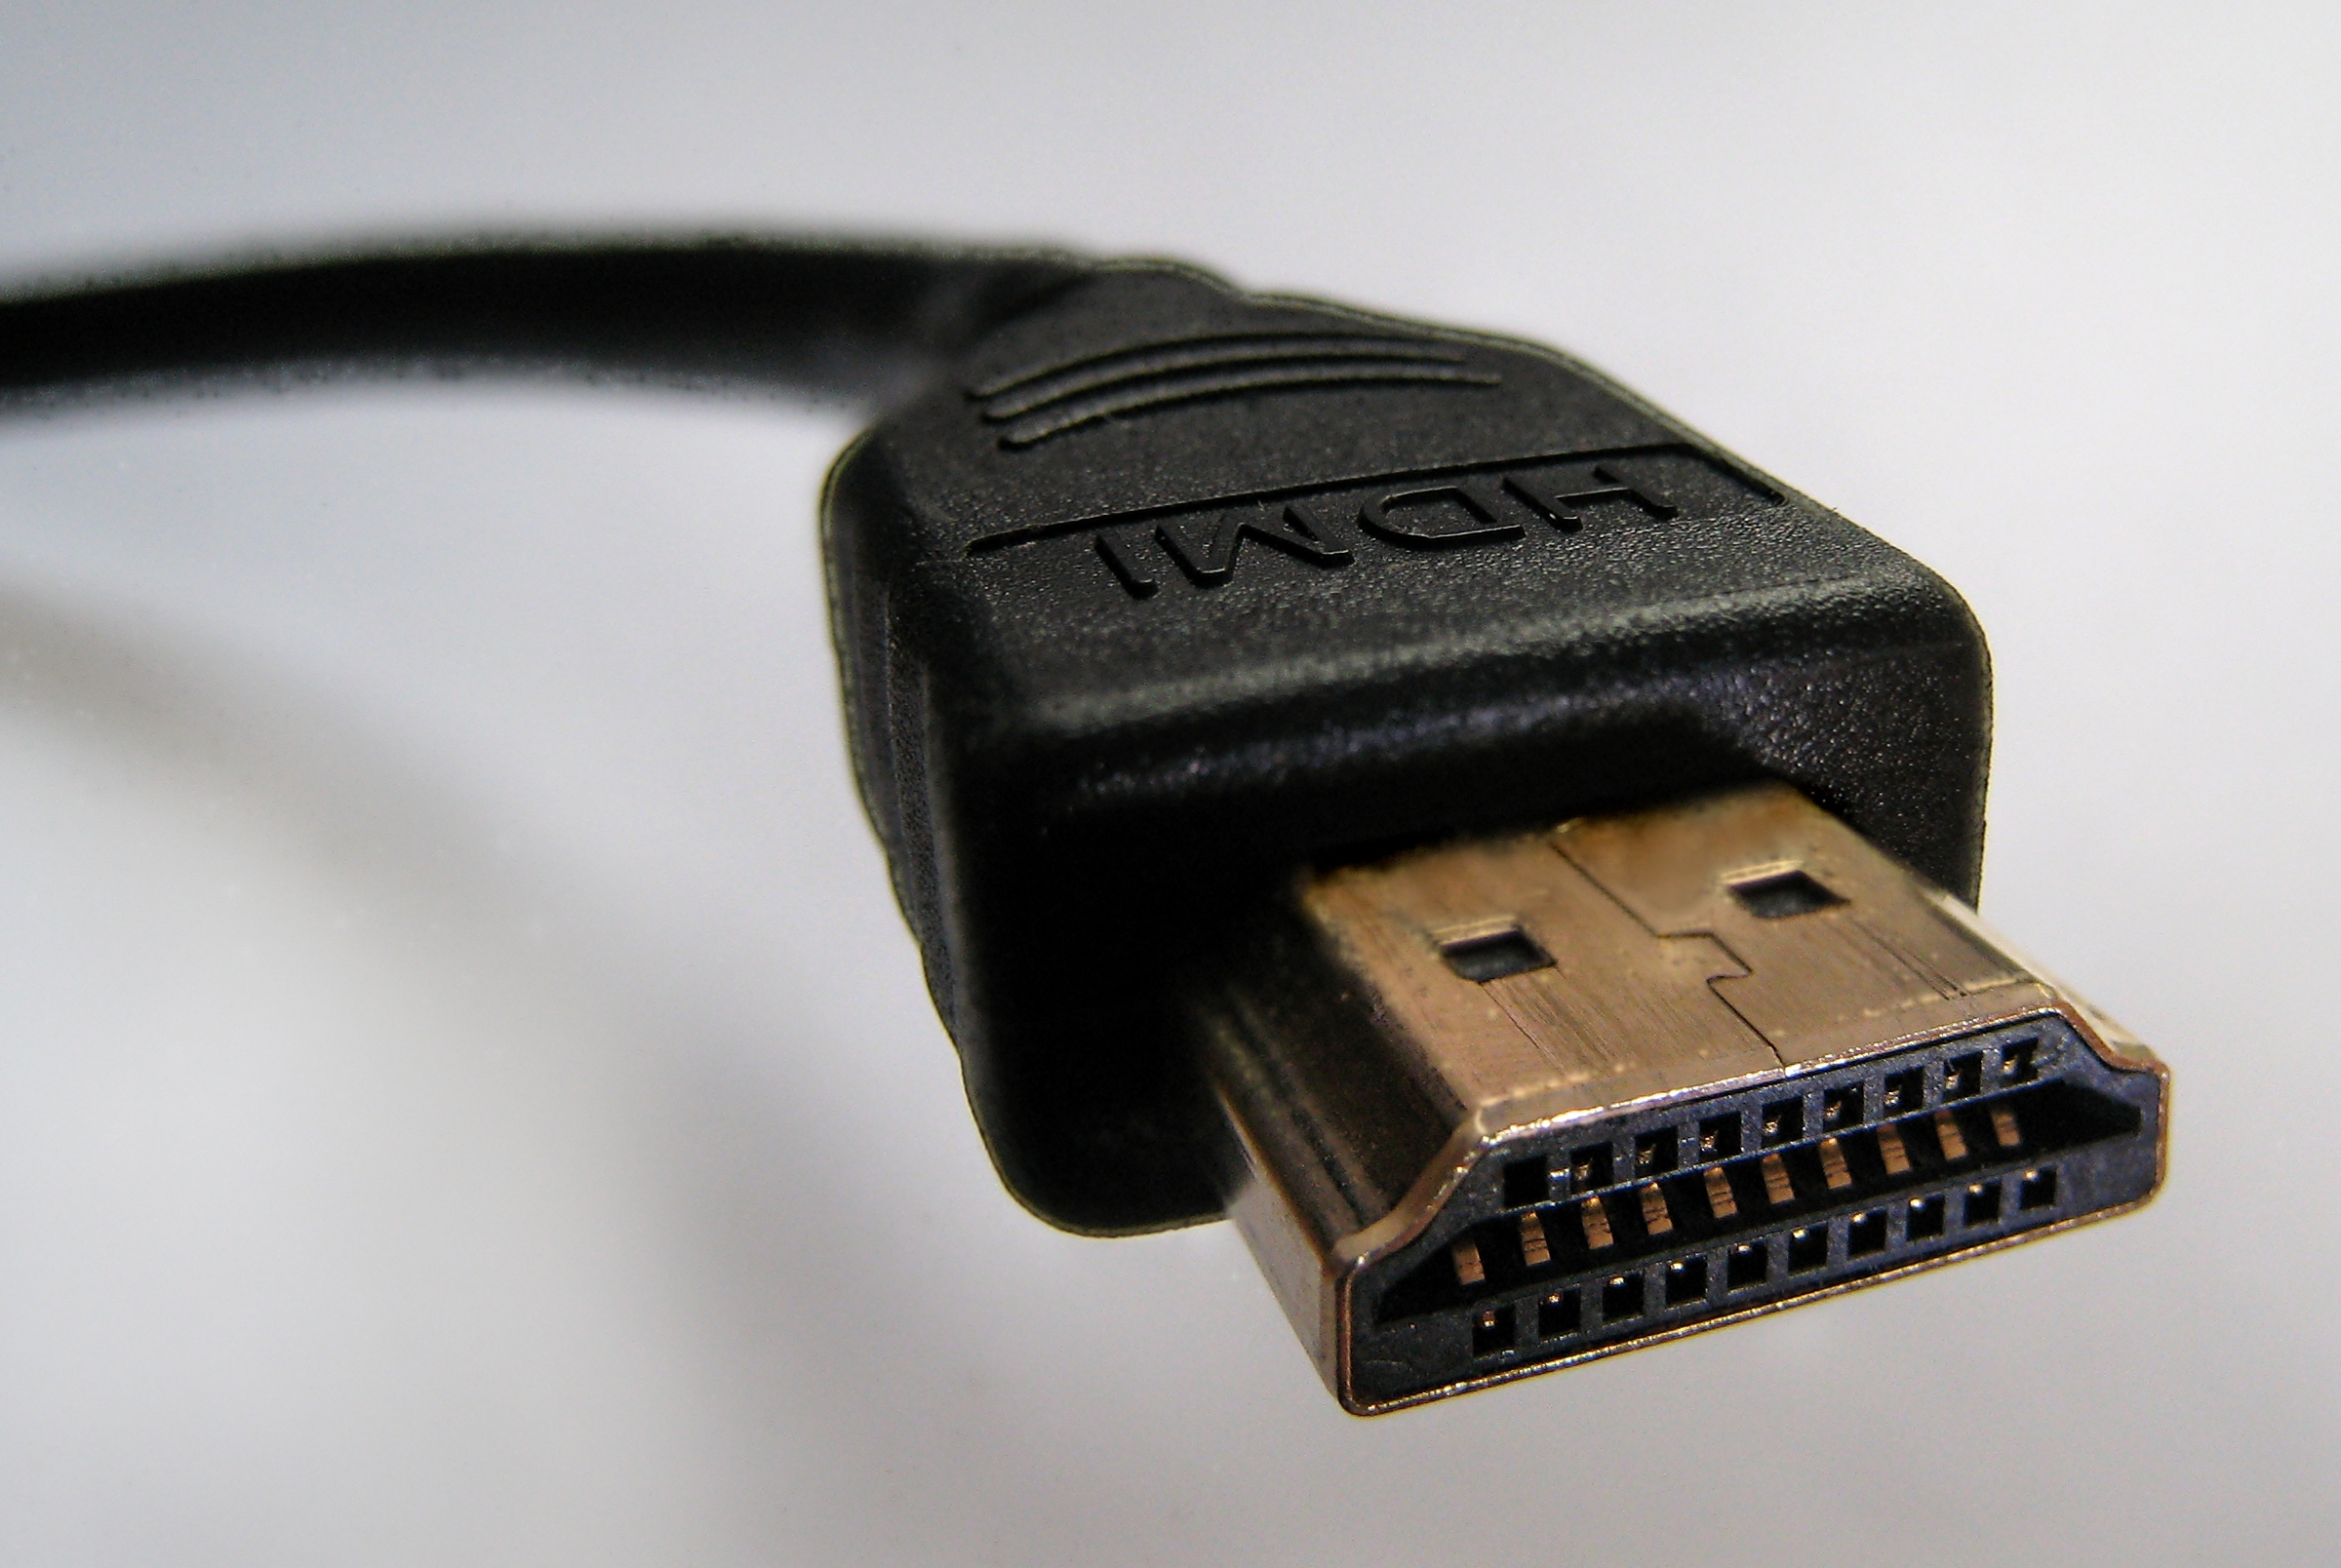 Wide range of cable lengths available
Lower cost compared to wireless HDMI